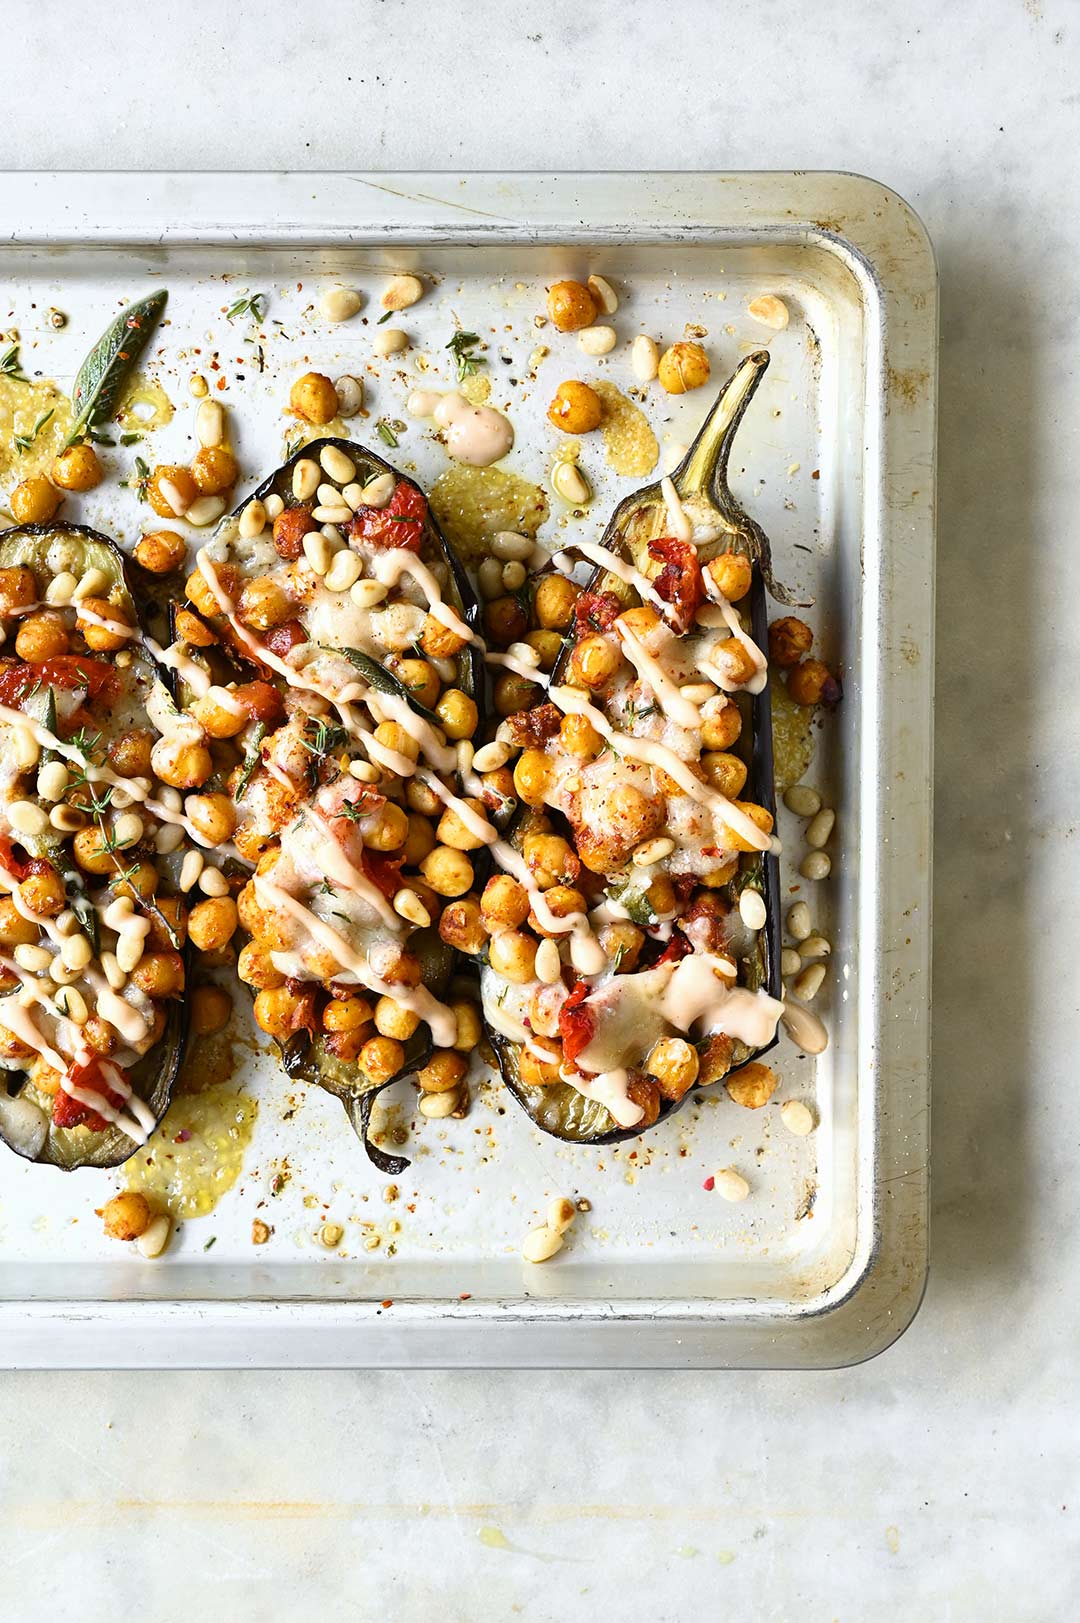 serving dumplings | Roasted aubergines with smokey chickpeas and parmesan